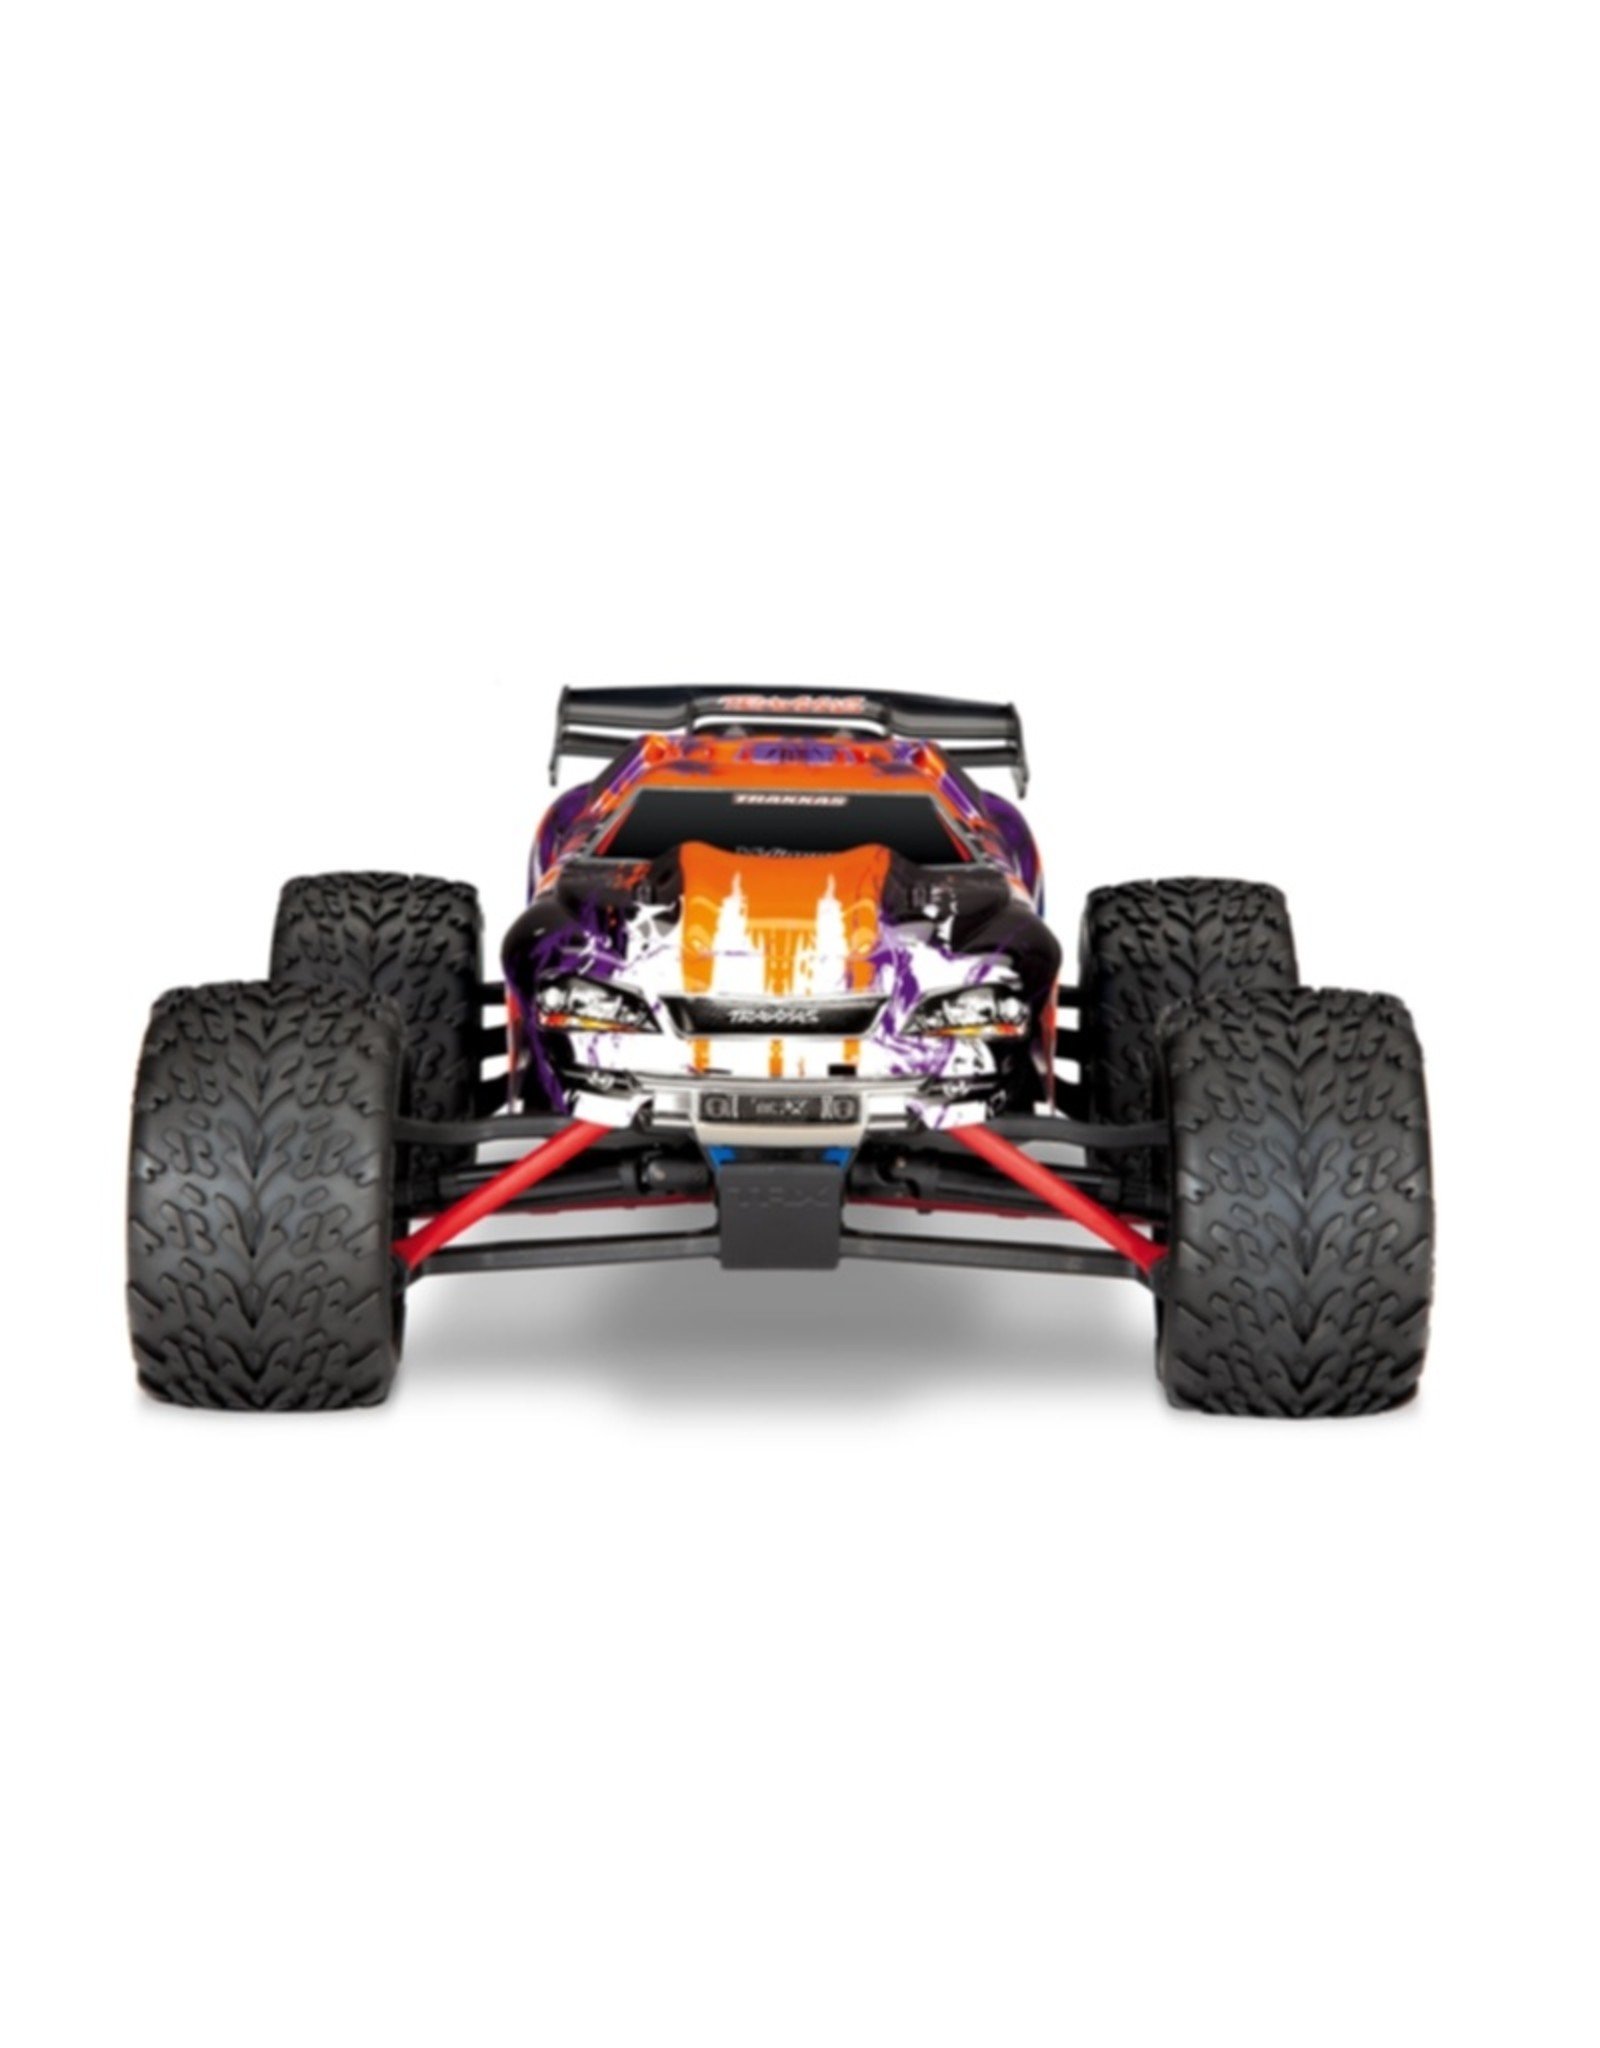 Traxxas TRA71076-3 Purple E-Revo VXL: 1/16 Scale Electric 4WD Racing Monster Truck. Ready-To-Race®